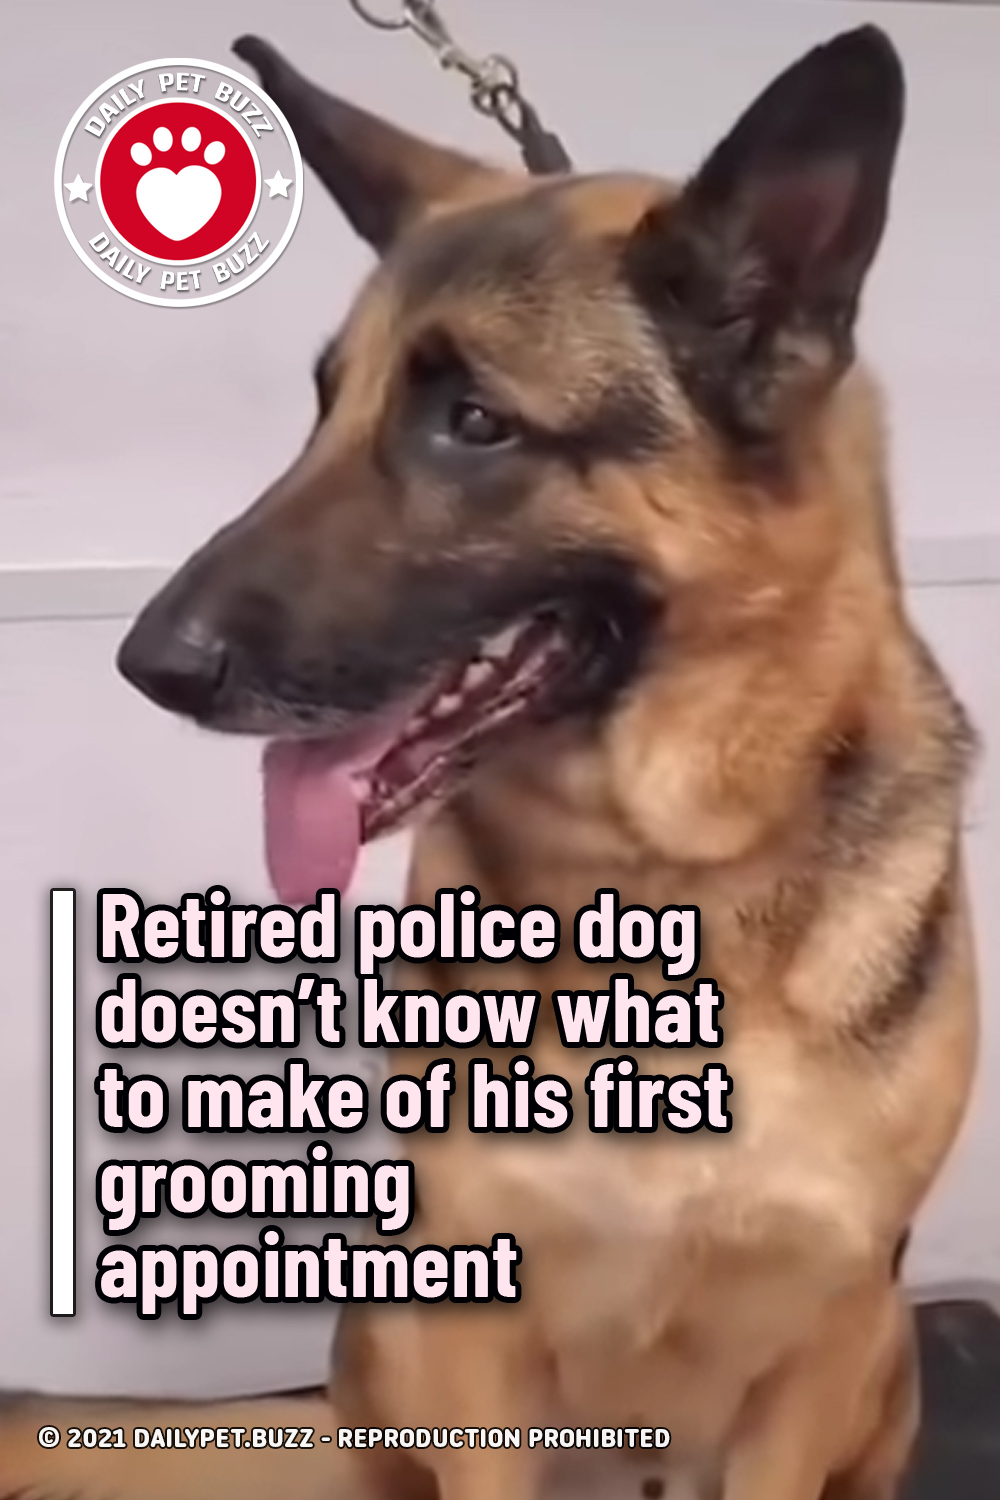 Retired police dog doesn’t know what to make of his first grooming appointment